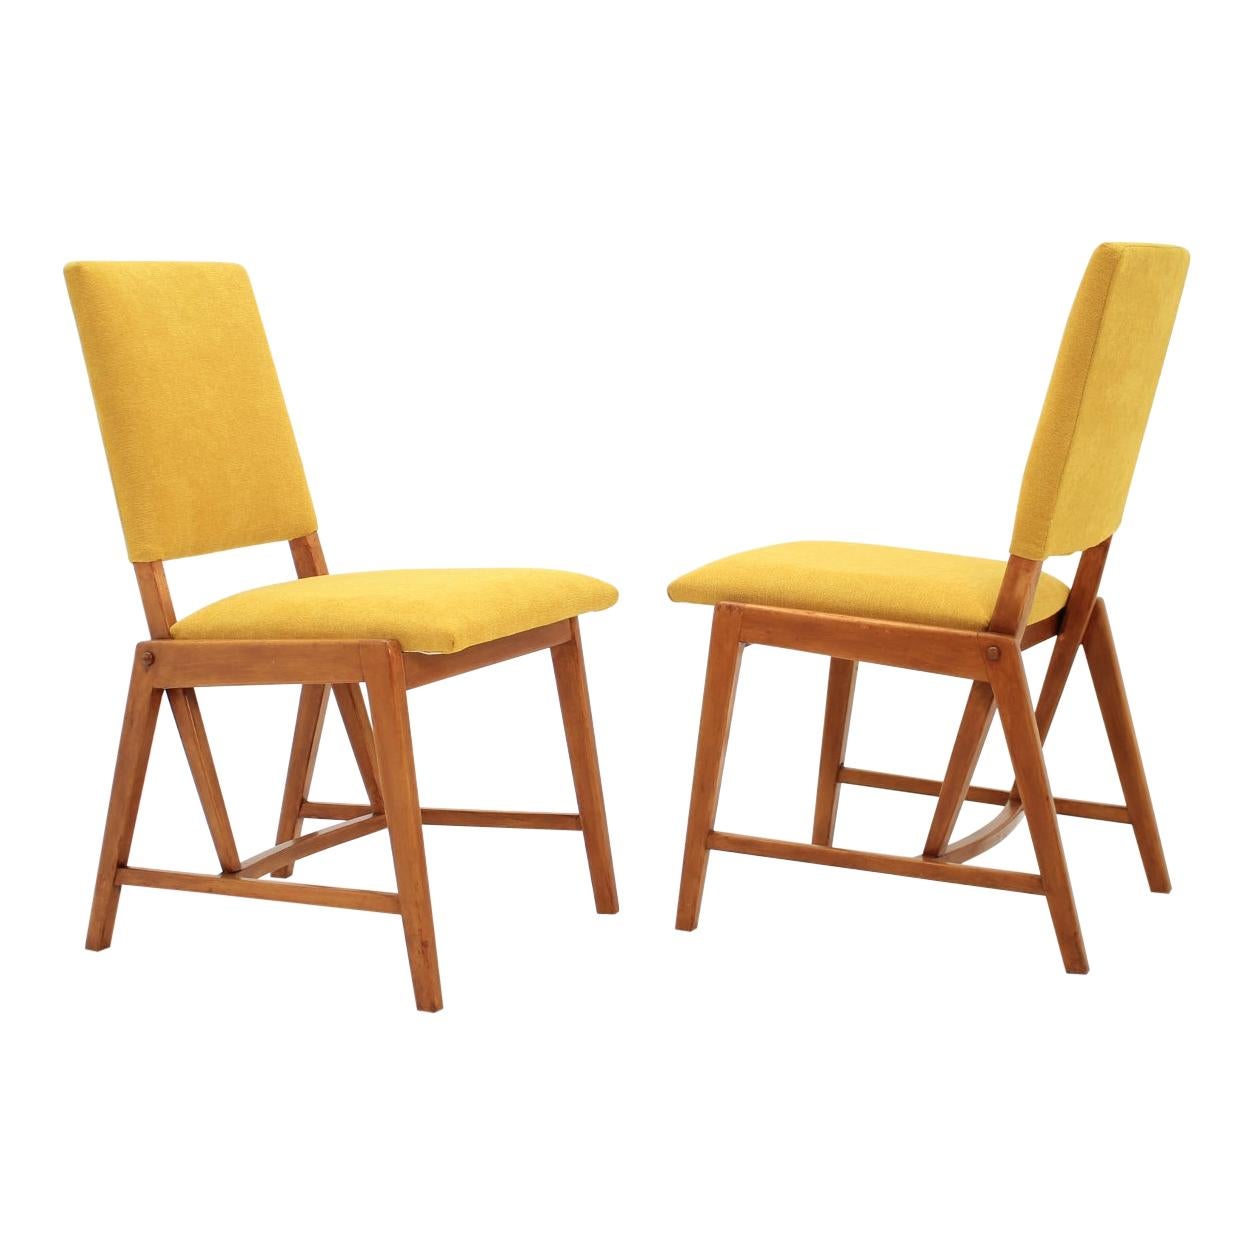 Pair of German Small Design Chairs, 1970s For Sale